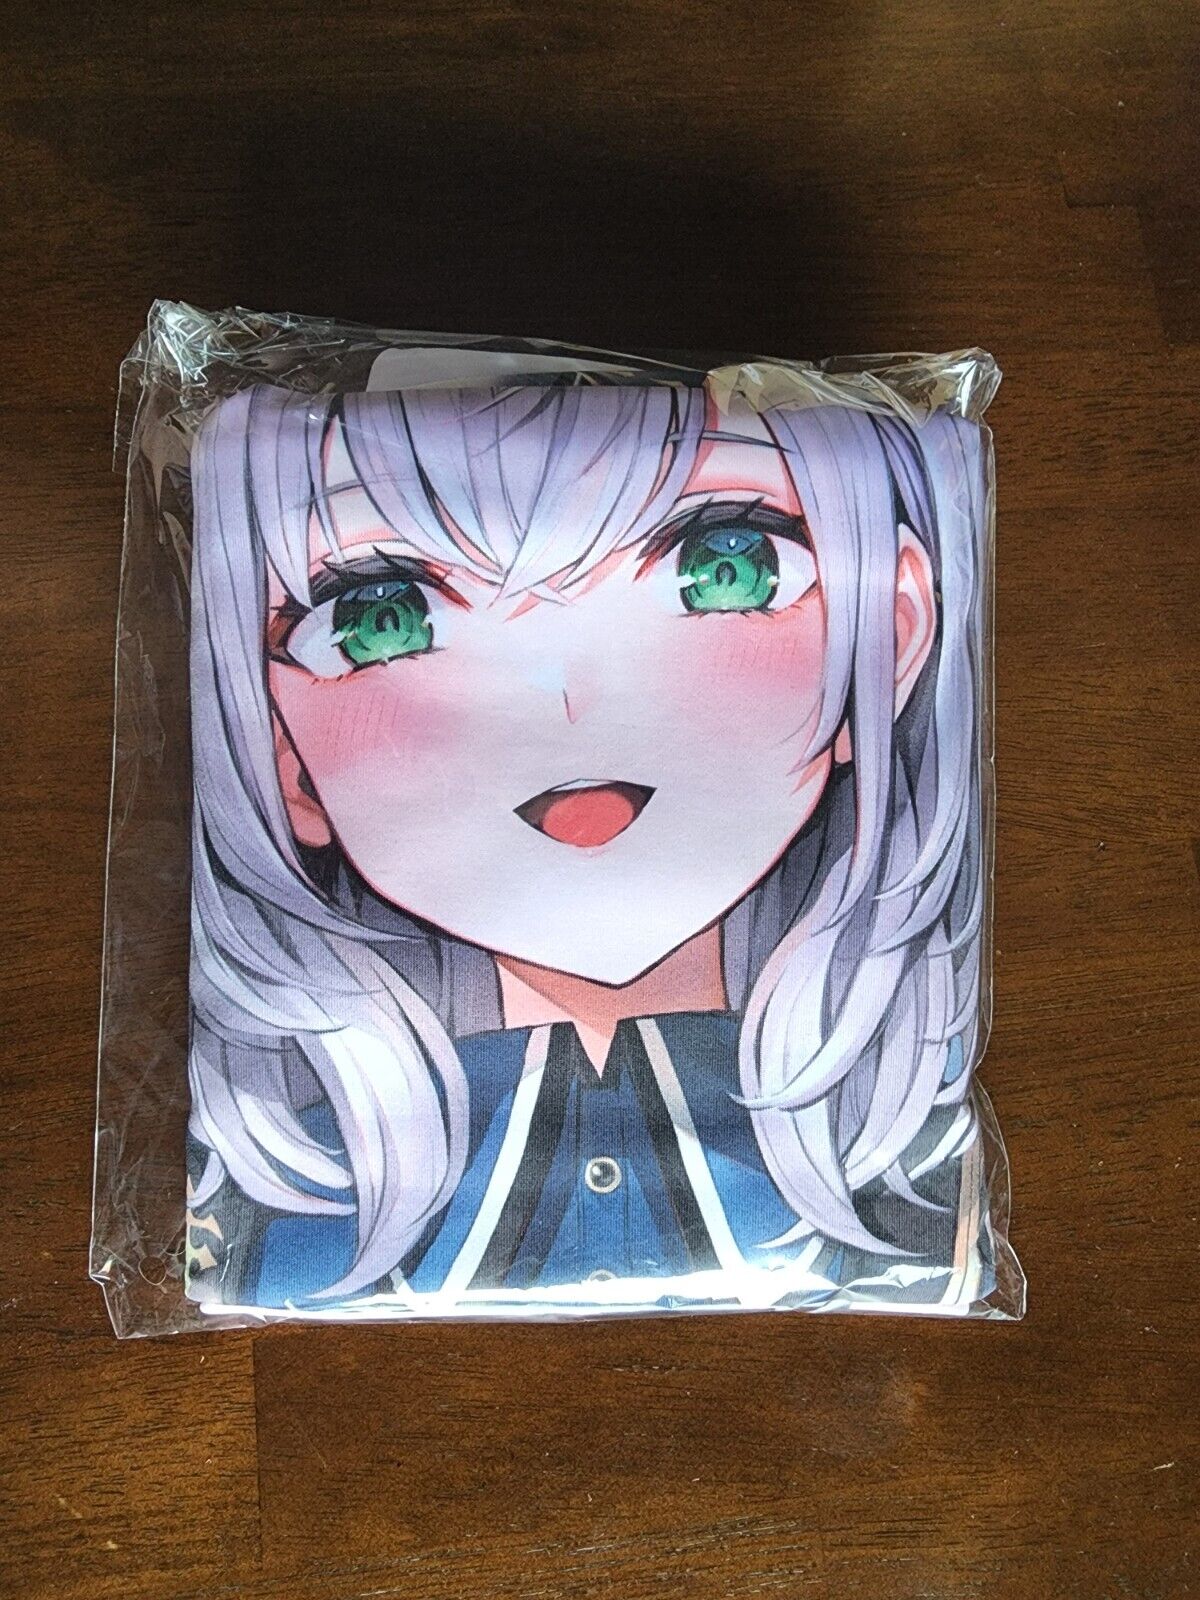 Official Hololive Shirogane Noel 2nd Anniversary Pillow Case - Brand New